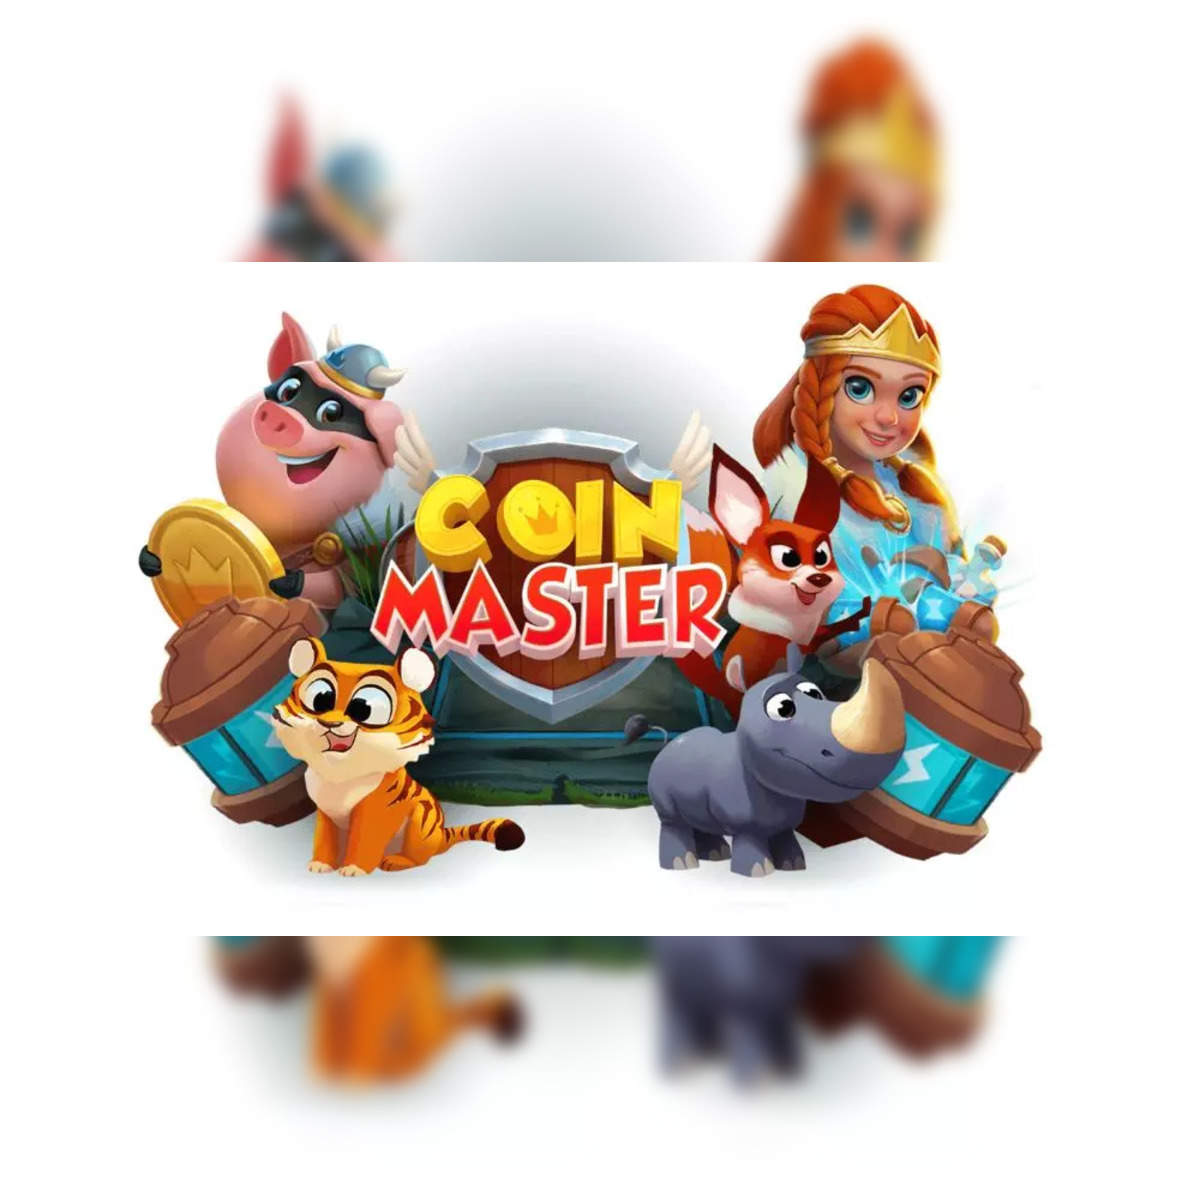 coin master free spin link | Coin master hack, Masters gift, Spinning